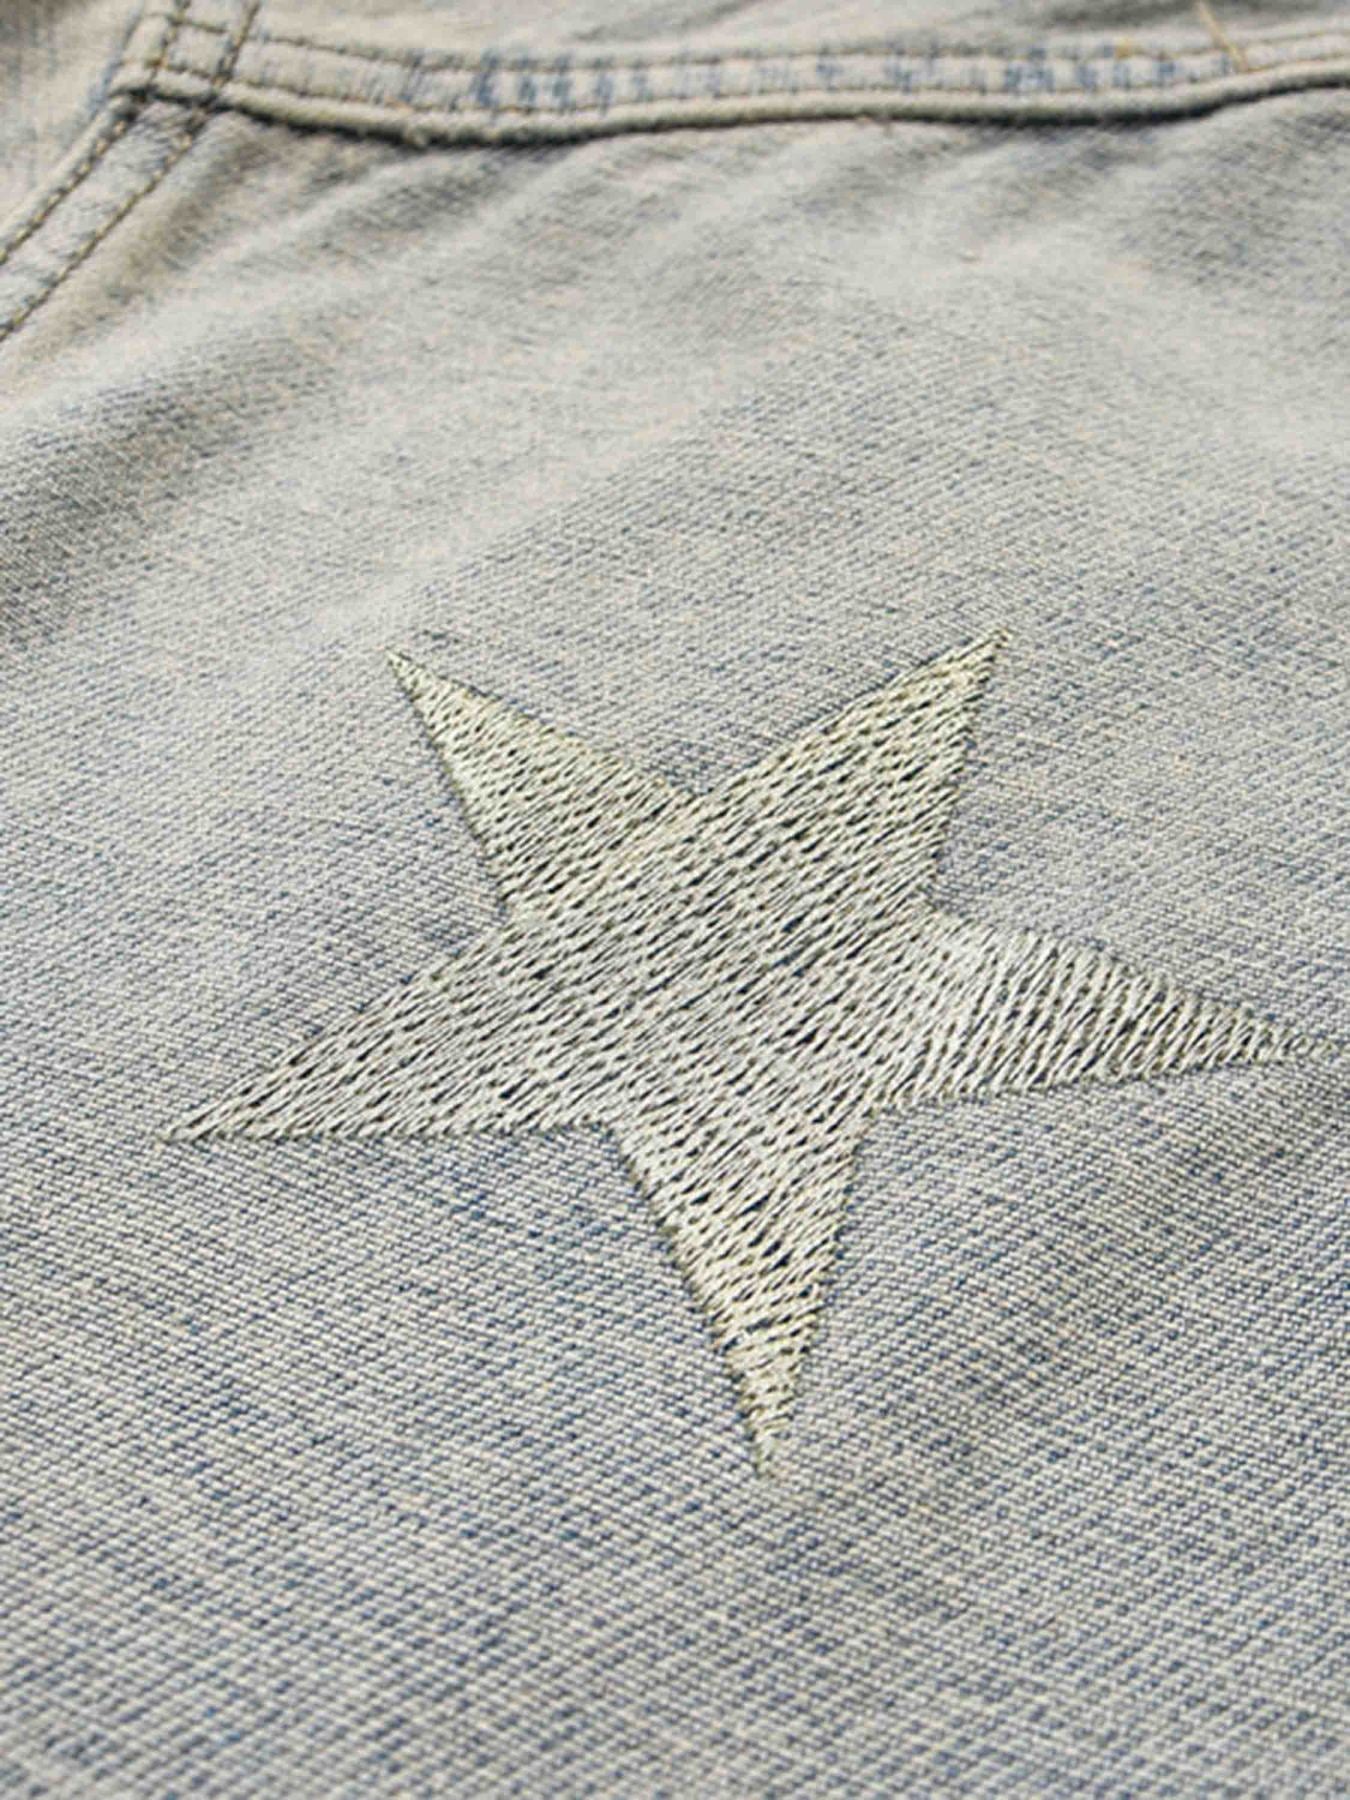 The Supermade Five-pointed Star Embroidered Zipper Jacket